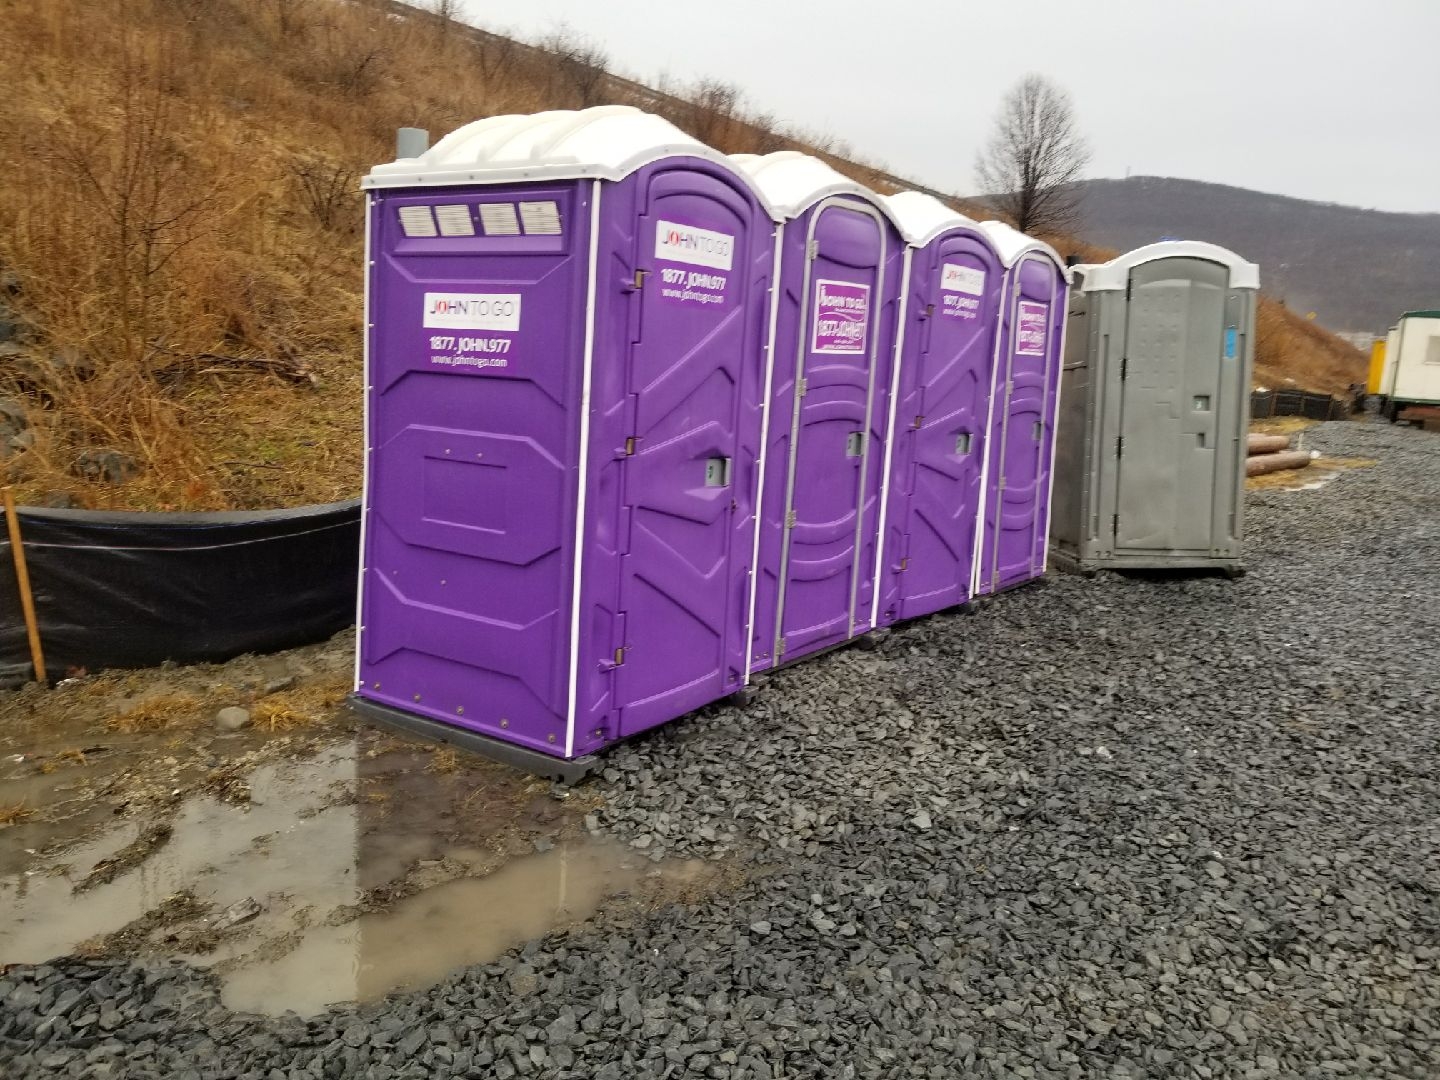 Spacious job site portable toilet units with ample capacity